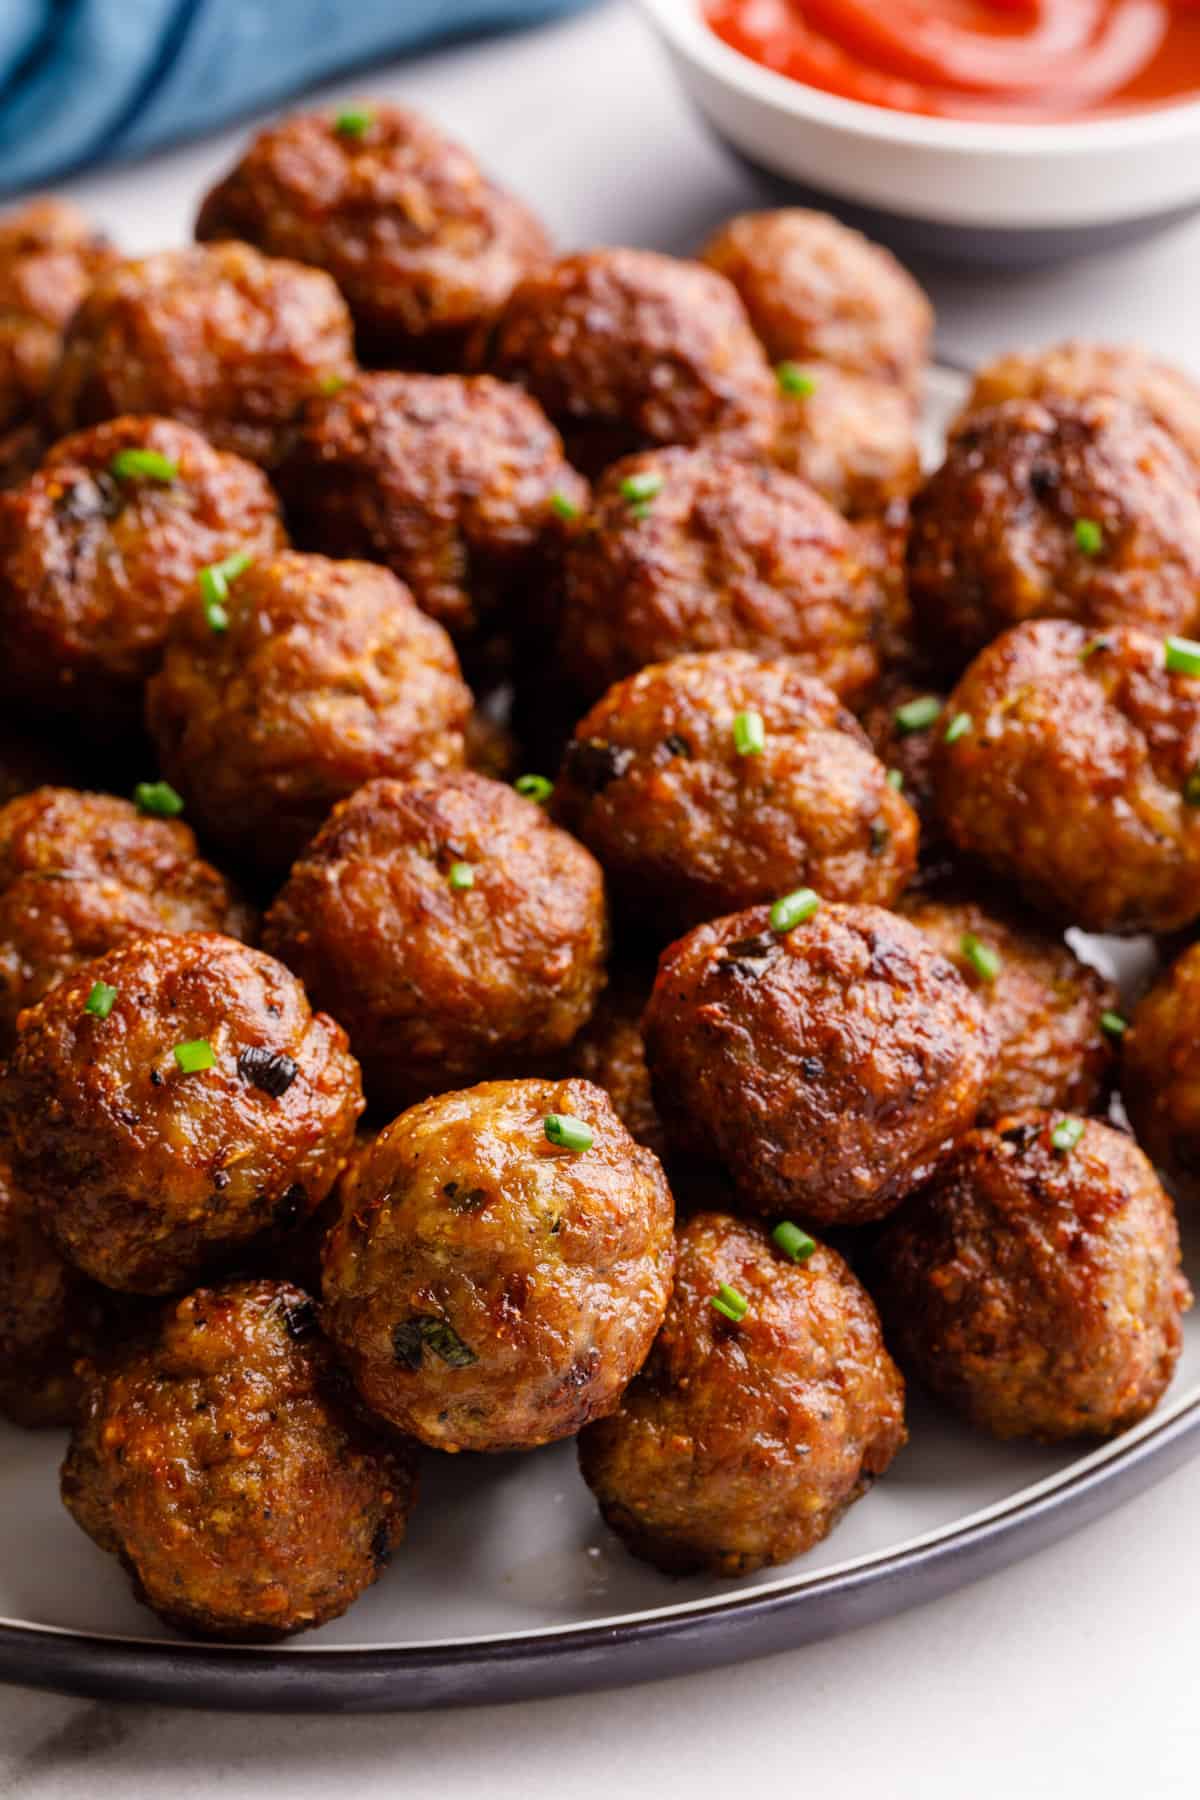 close up image of a pile of air fryer meatballs served on a round plate.